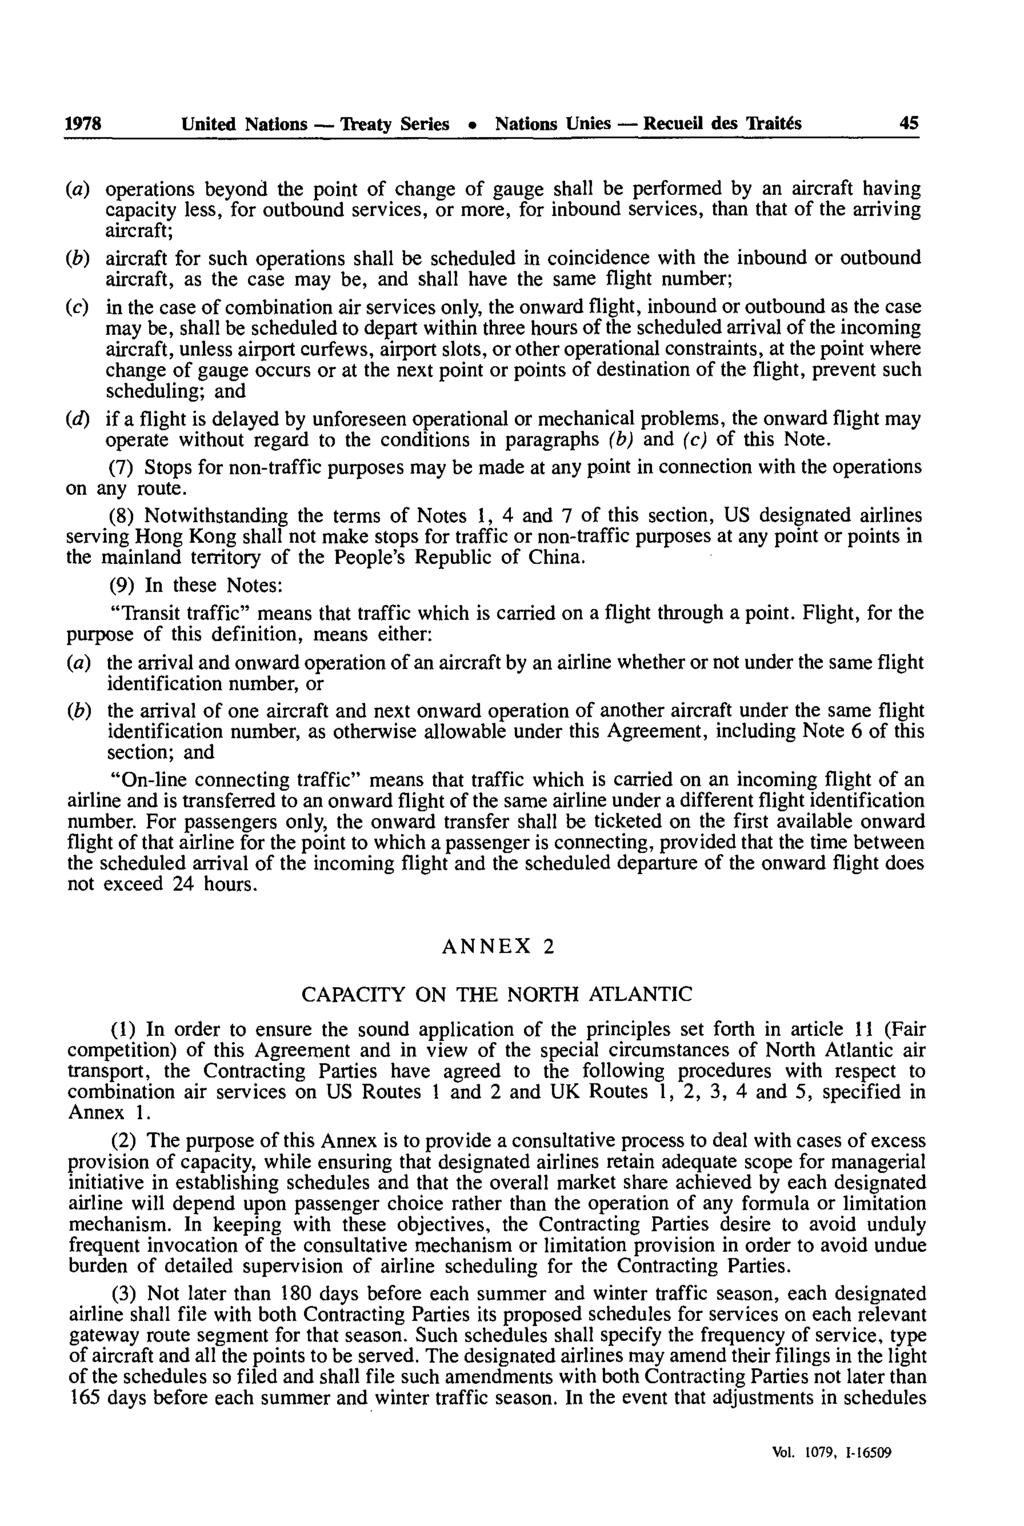 1978 United Nations Treaty Series Nations Unies Recueil des Traités 45 (a) operations beyond the point of change of gauge shall be performed by an aircraft having capacity less, for outbound